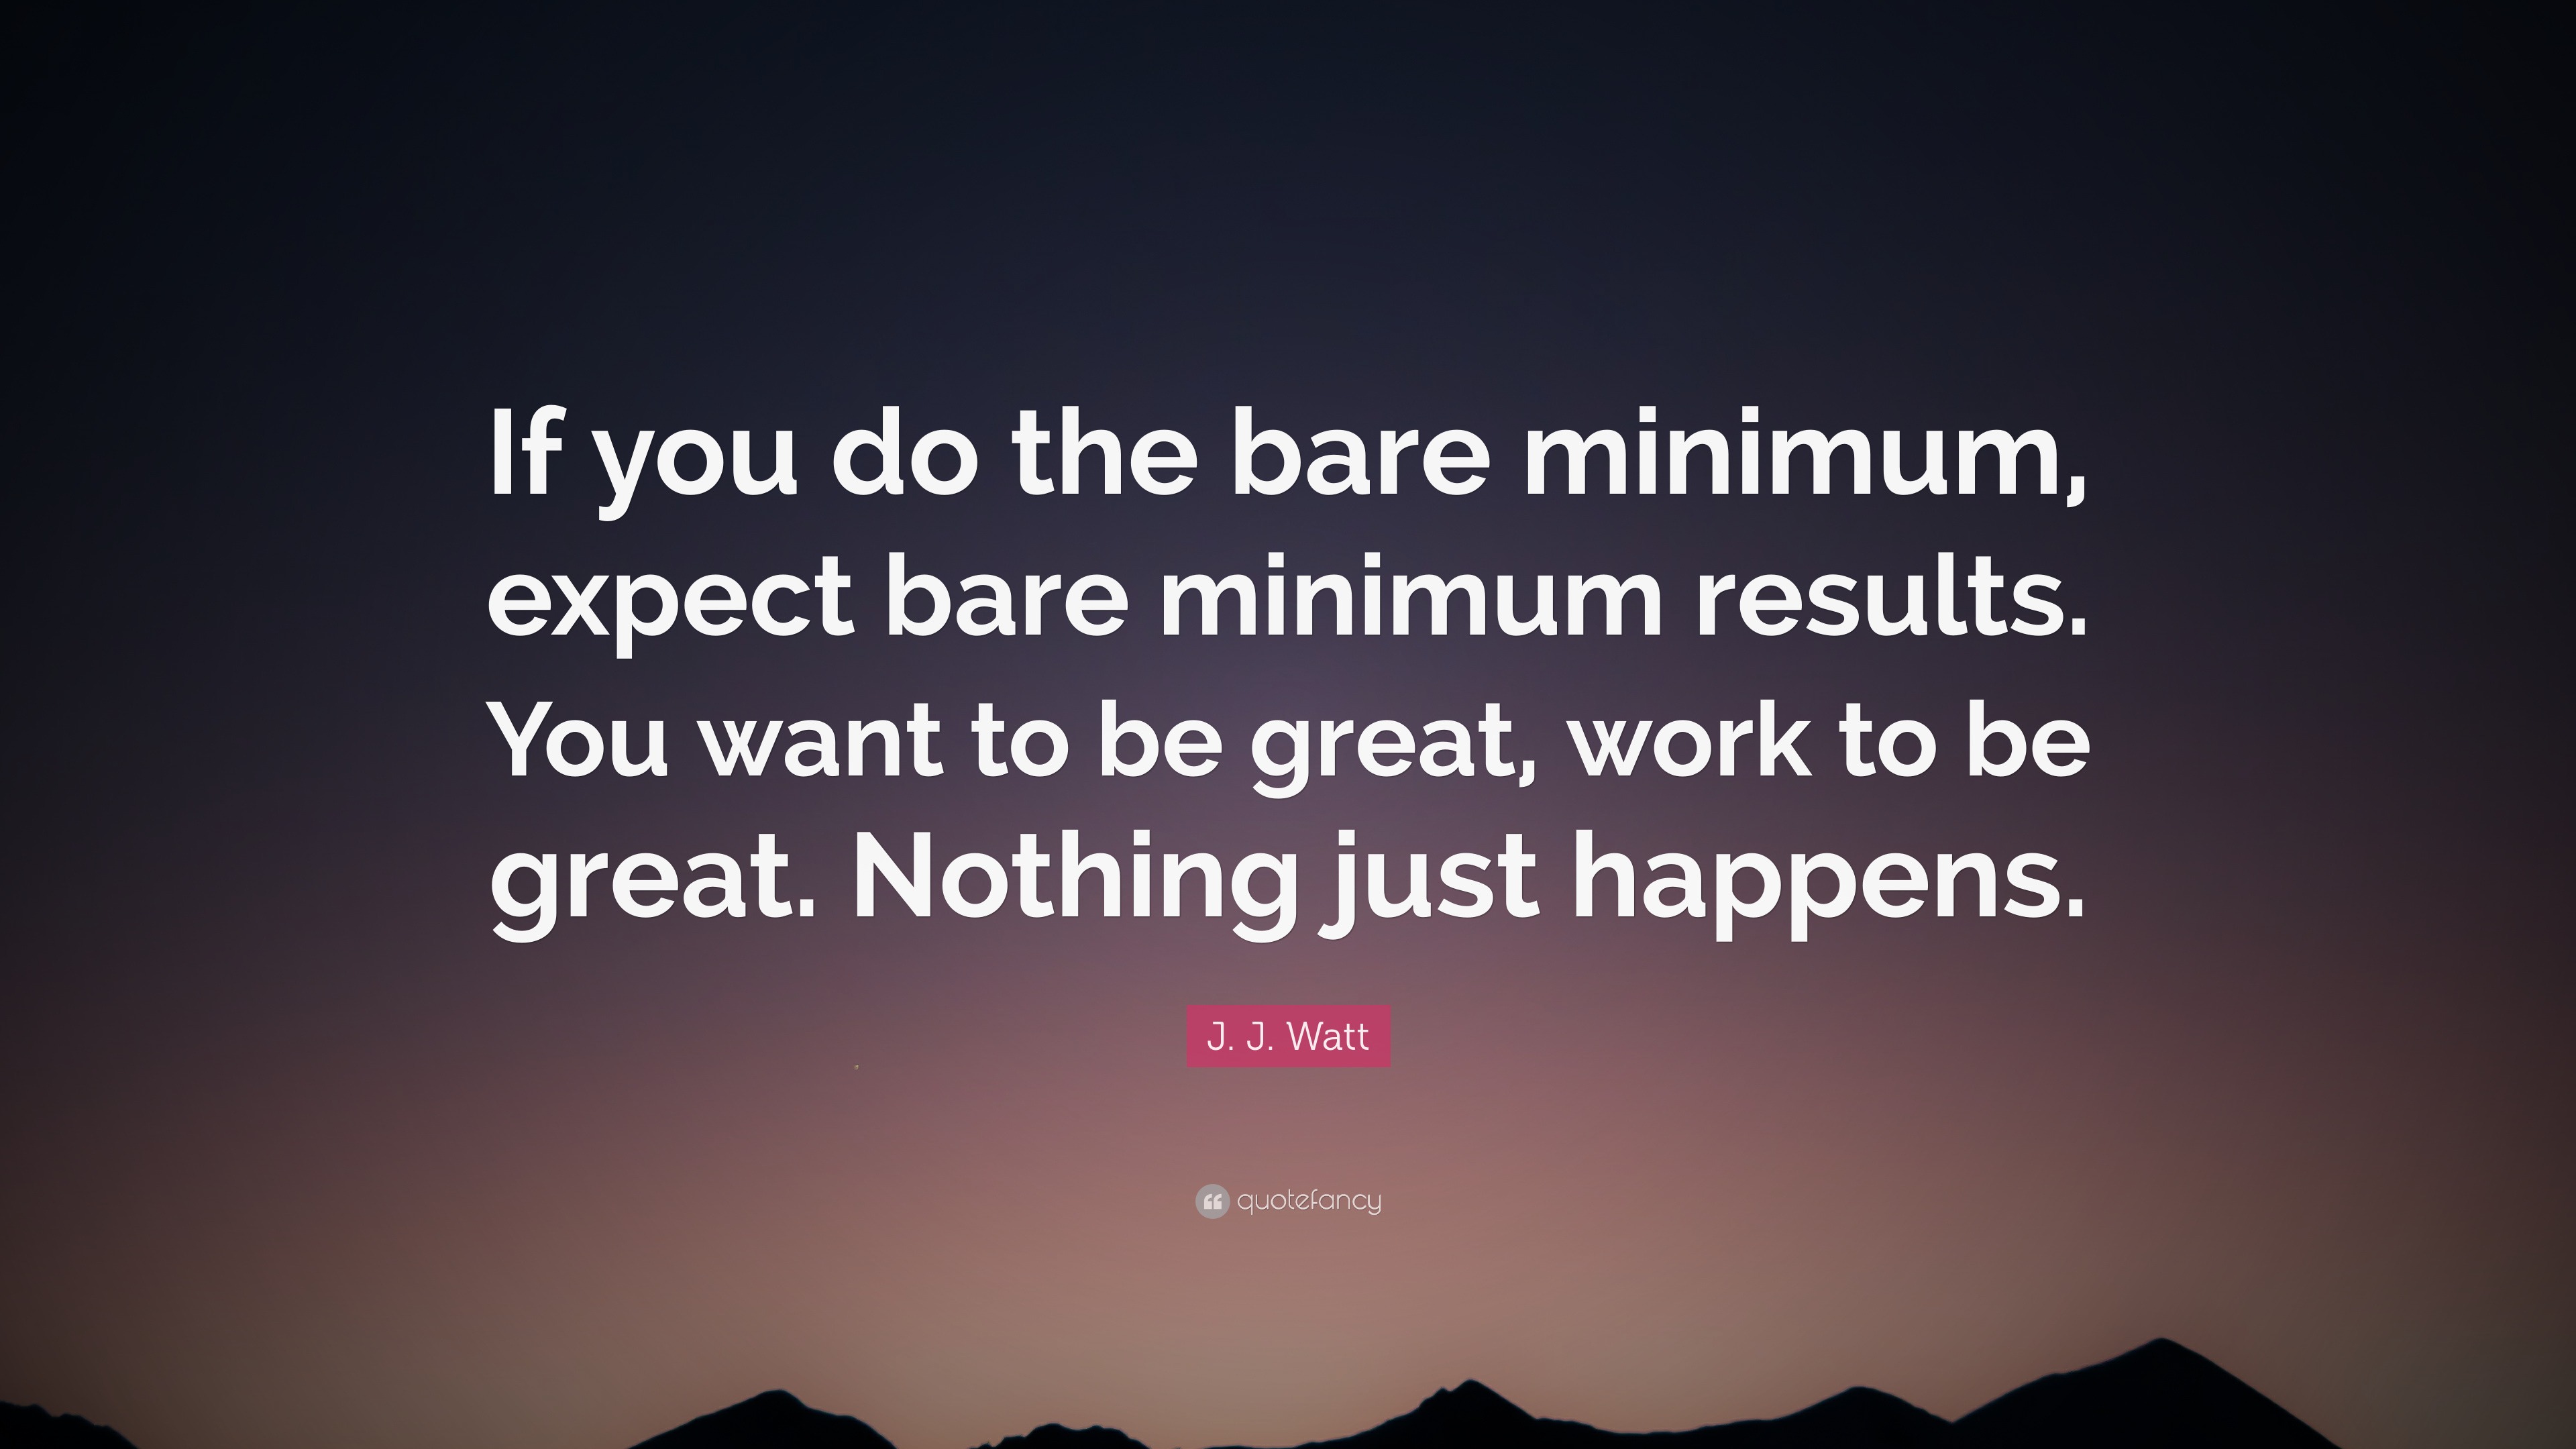 J. J. Watt Quote: “If you do the bare minimum, expect bare minimum results. You want ...3840 x 2160